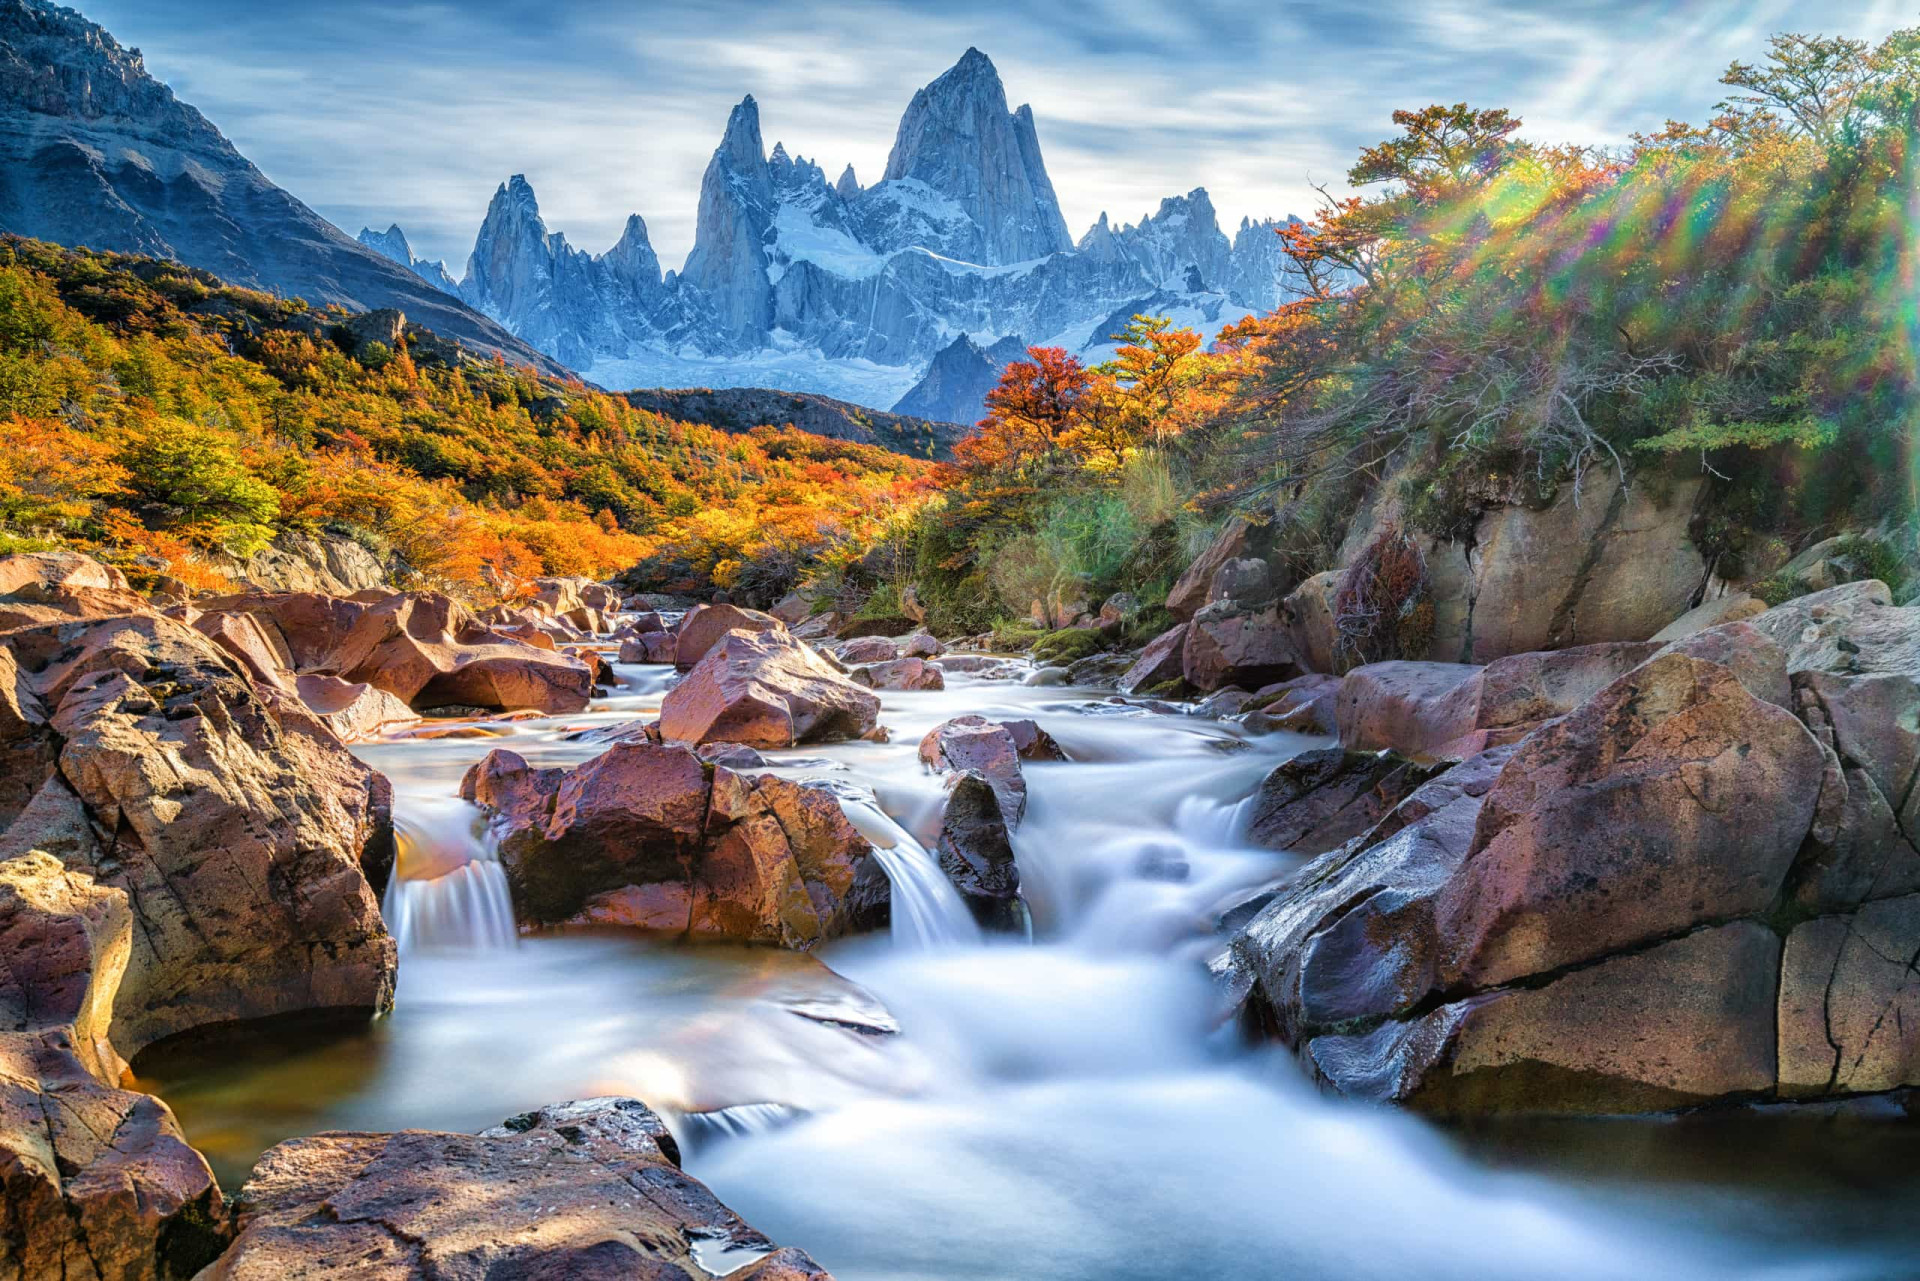 Argentina has the largest share of Patagonia at 90%. It's famous for its luxuriant greenery, rare wildlife, and a variety of terrains. There are many animals such as the Patagonian fox and the Patagonian hog-nosed skunk that you will not find anywhere else on the planet.<p><a href="https://www.msn.com/en-us/community/channel/vid-7xx8mnucu55yw63we9va2gwr7uihbxwc68fxqp25x6tg4ftibpra?cvid=94631541bc0f4f89bfd59158d696ad7e">Follow us and access great exclusive content every day</a></p>